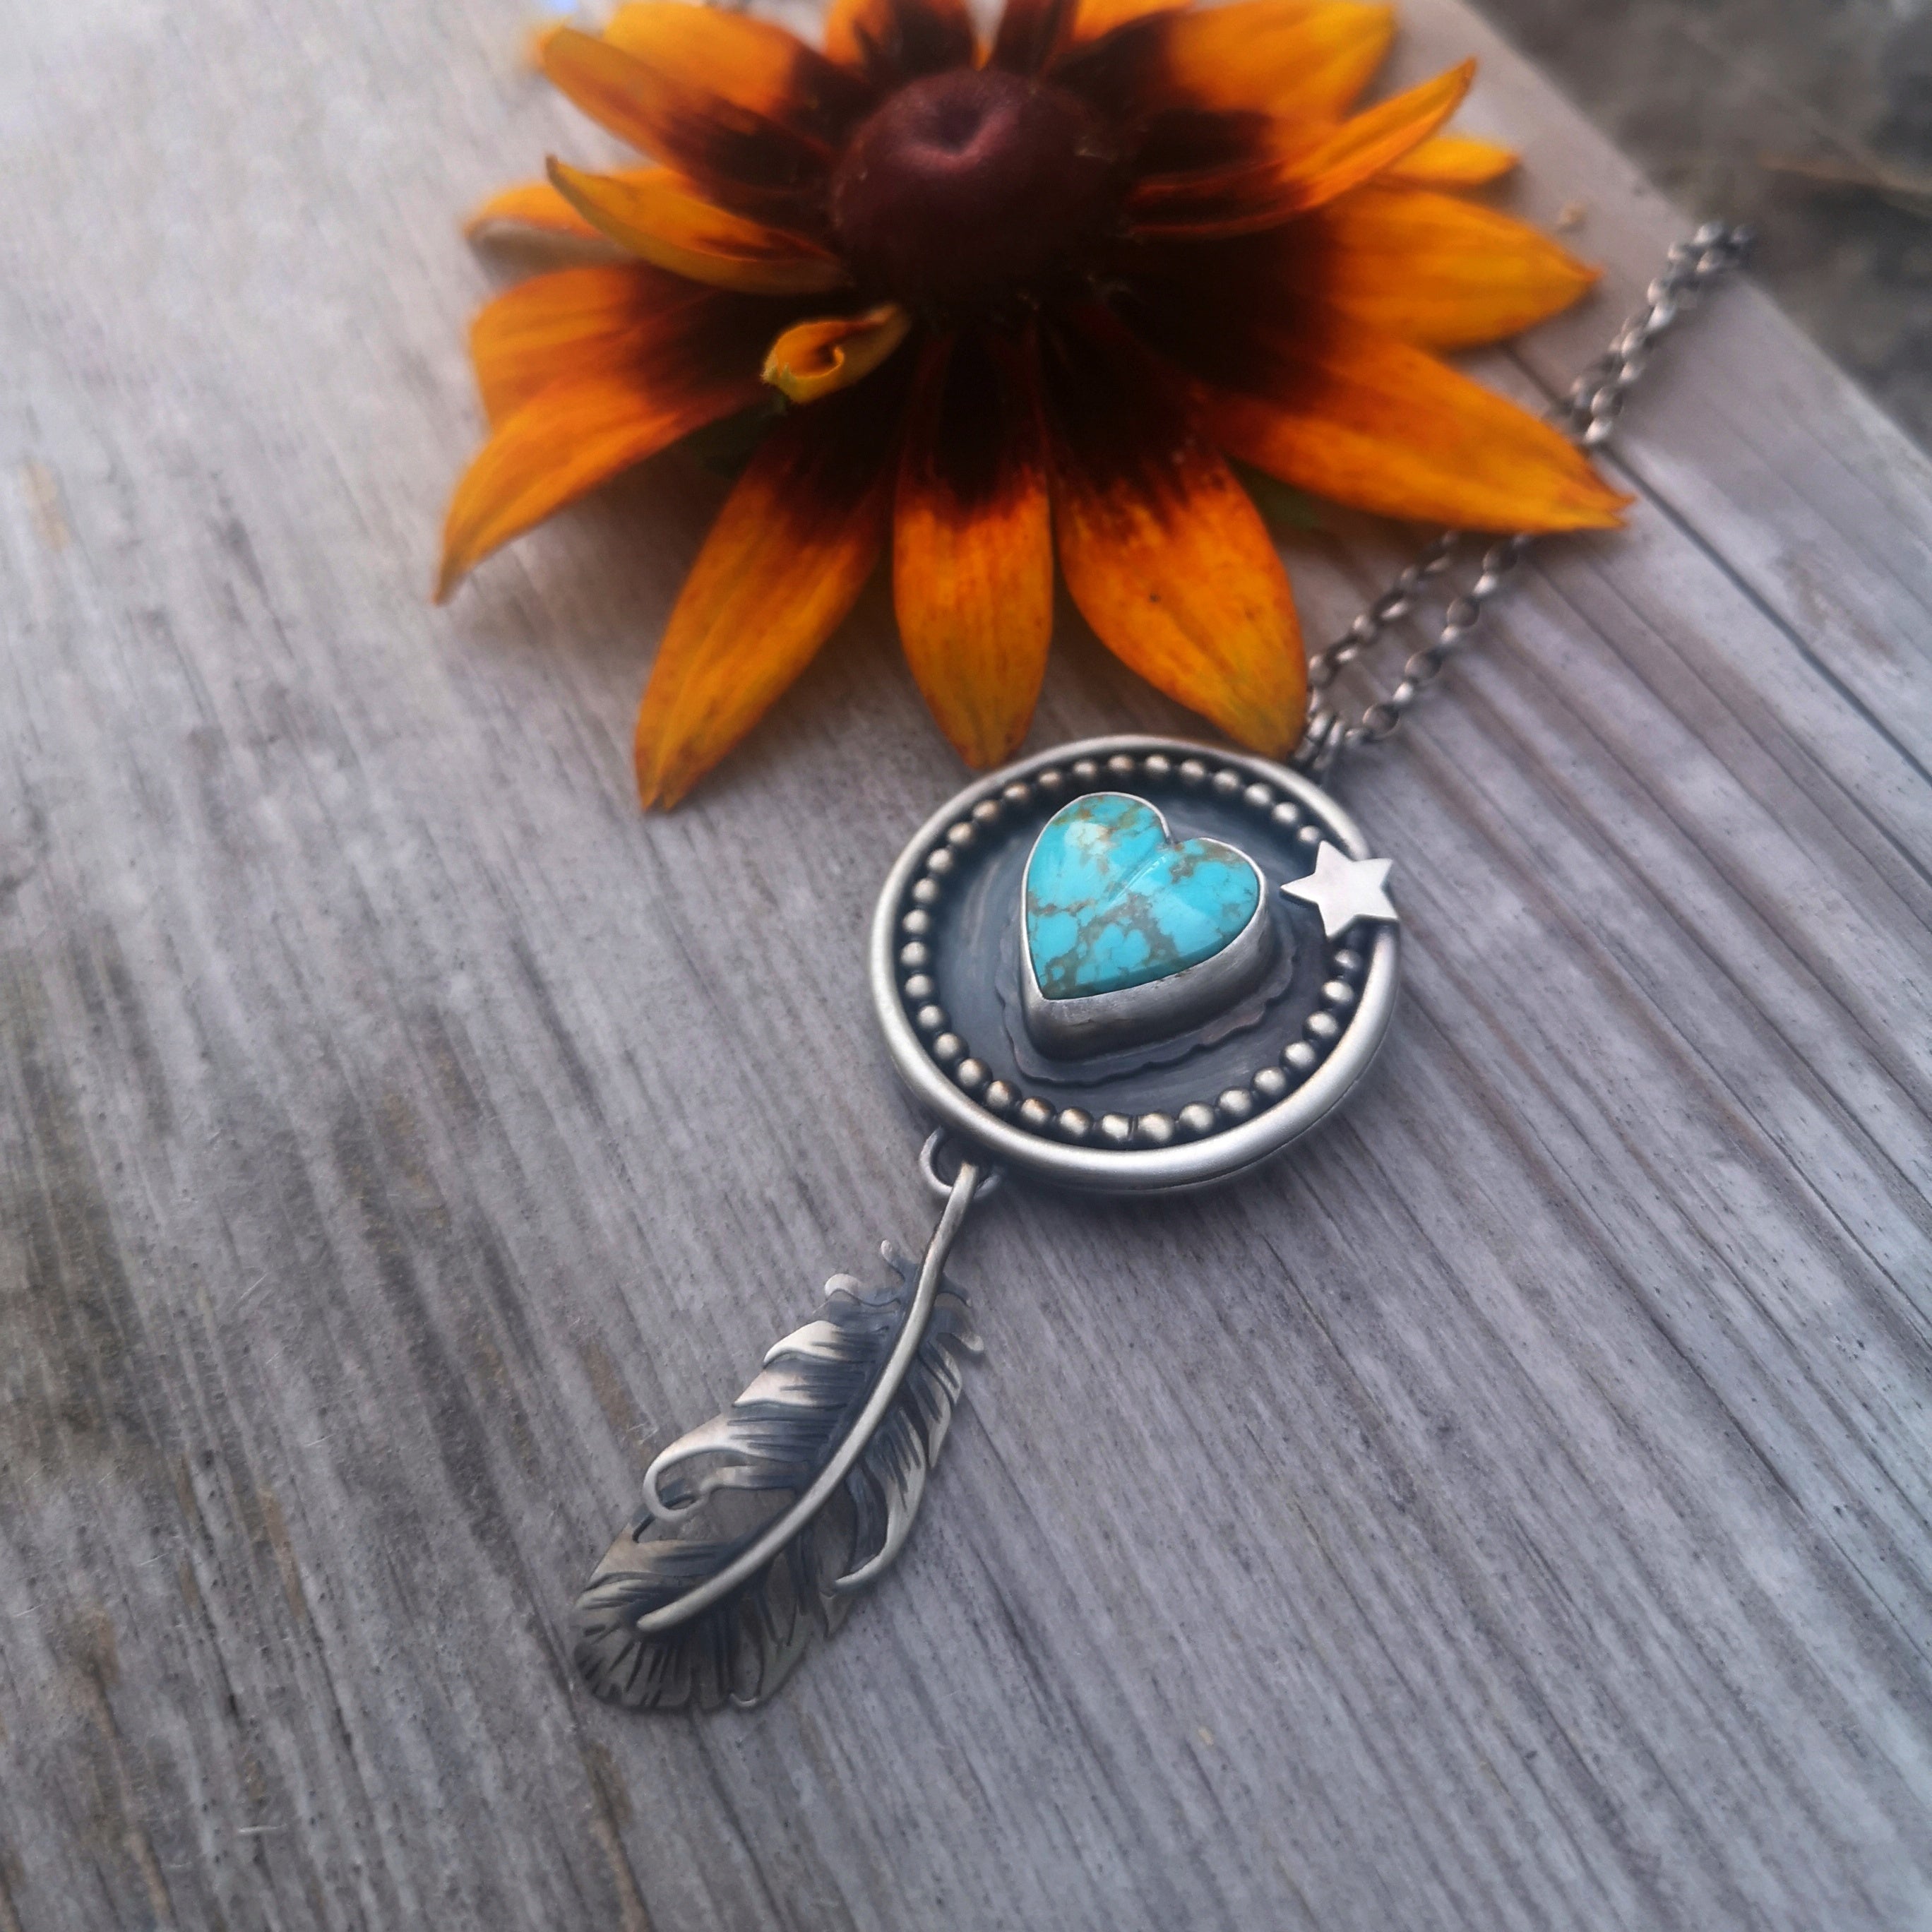 The Turquoise & Feather Necklace